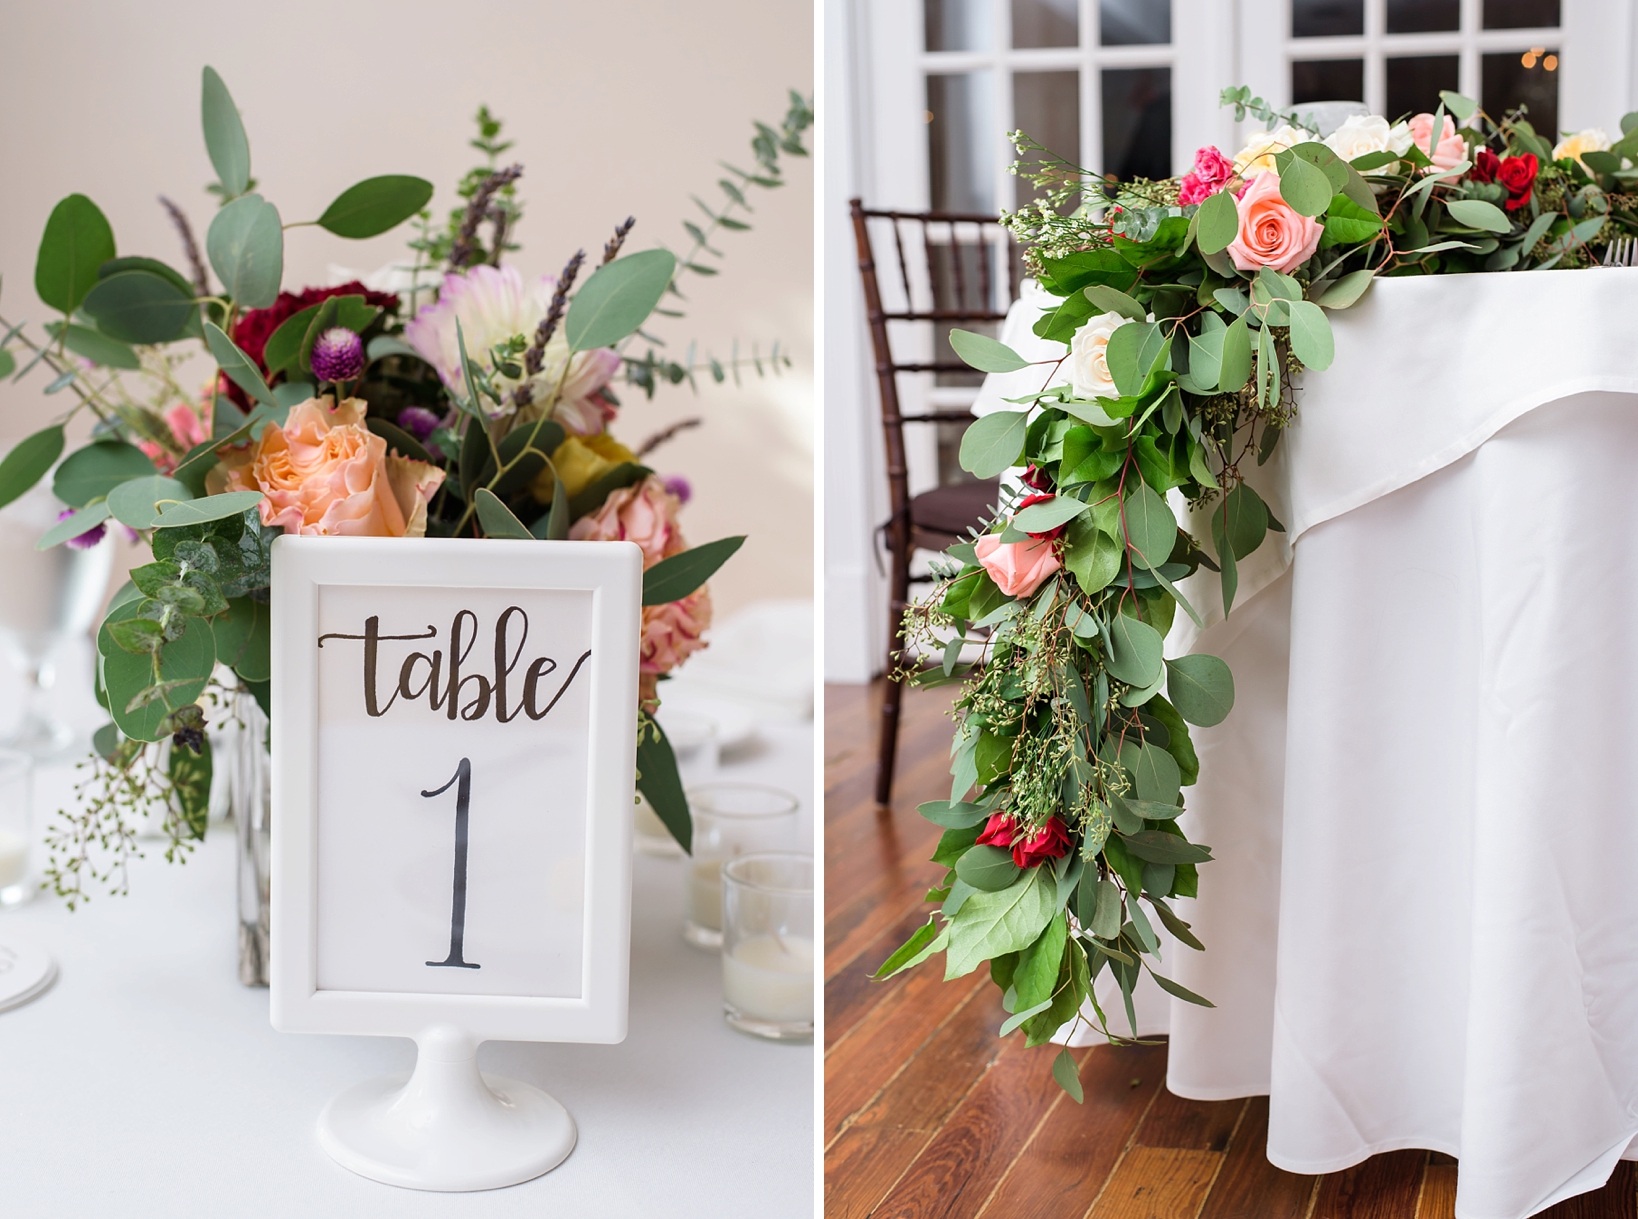 Reception details including a floral runner and a table sign